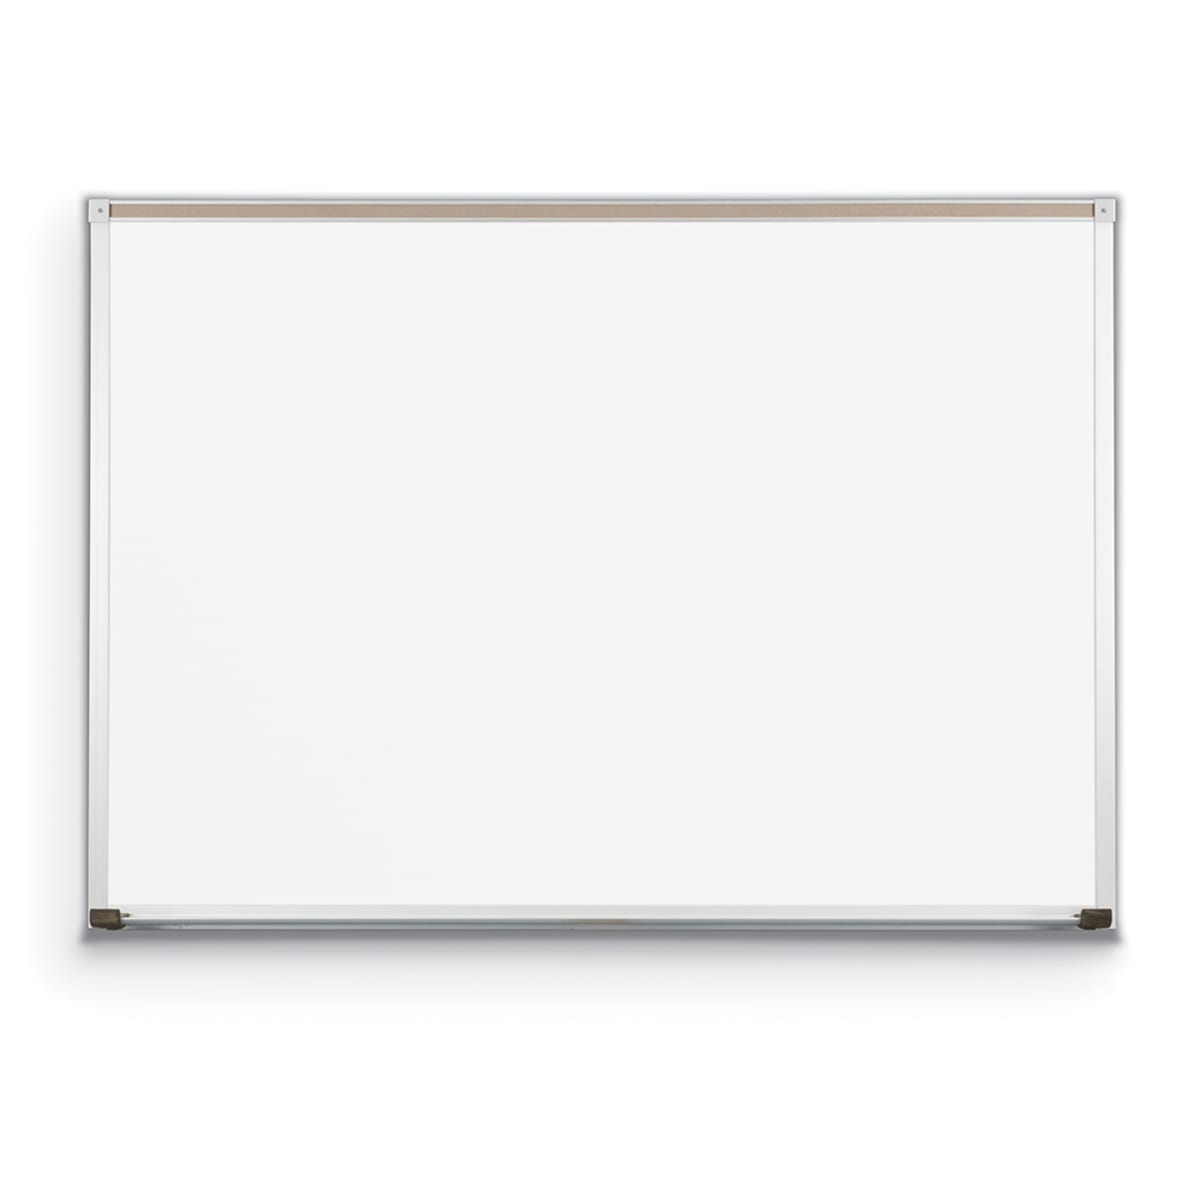 Mooreco Dura-Rite Markerboards + Deluxe Aluminum Trim - 4'H x 6'W (Mooreco 212AG) - SchoolOutlet